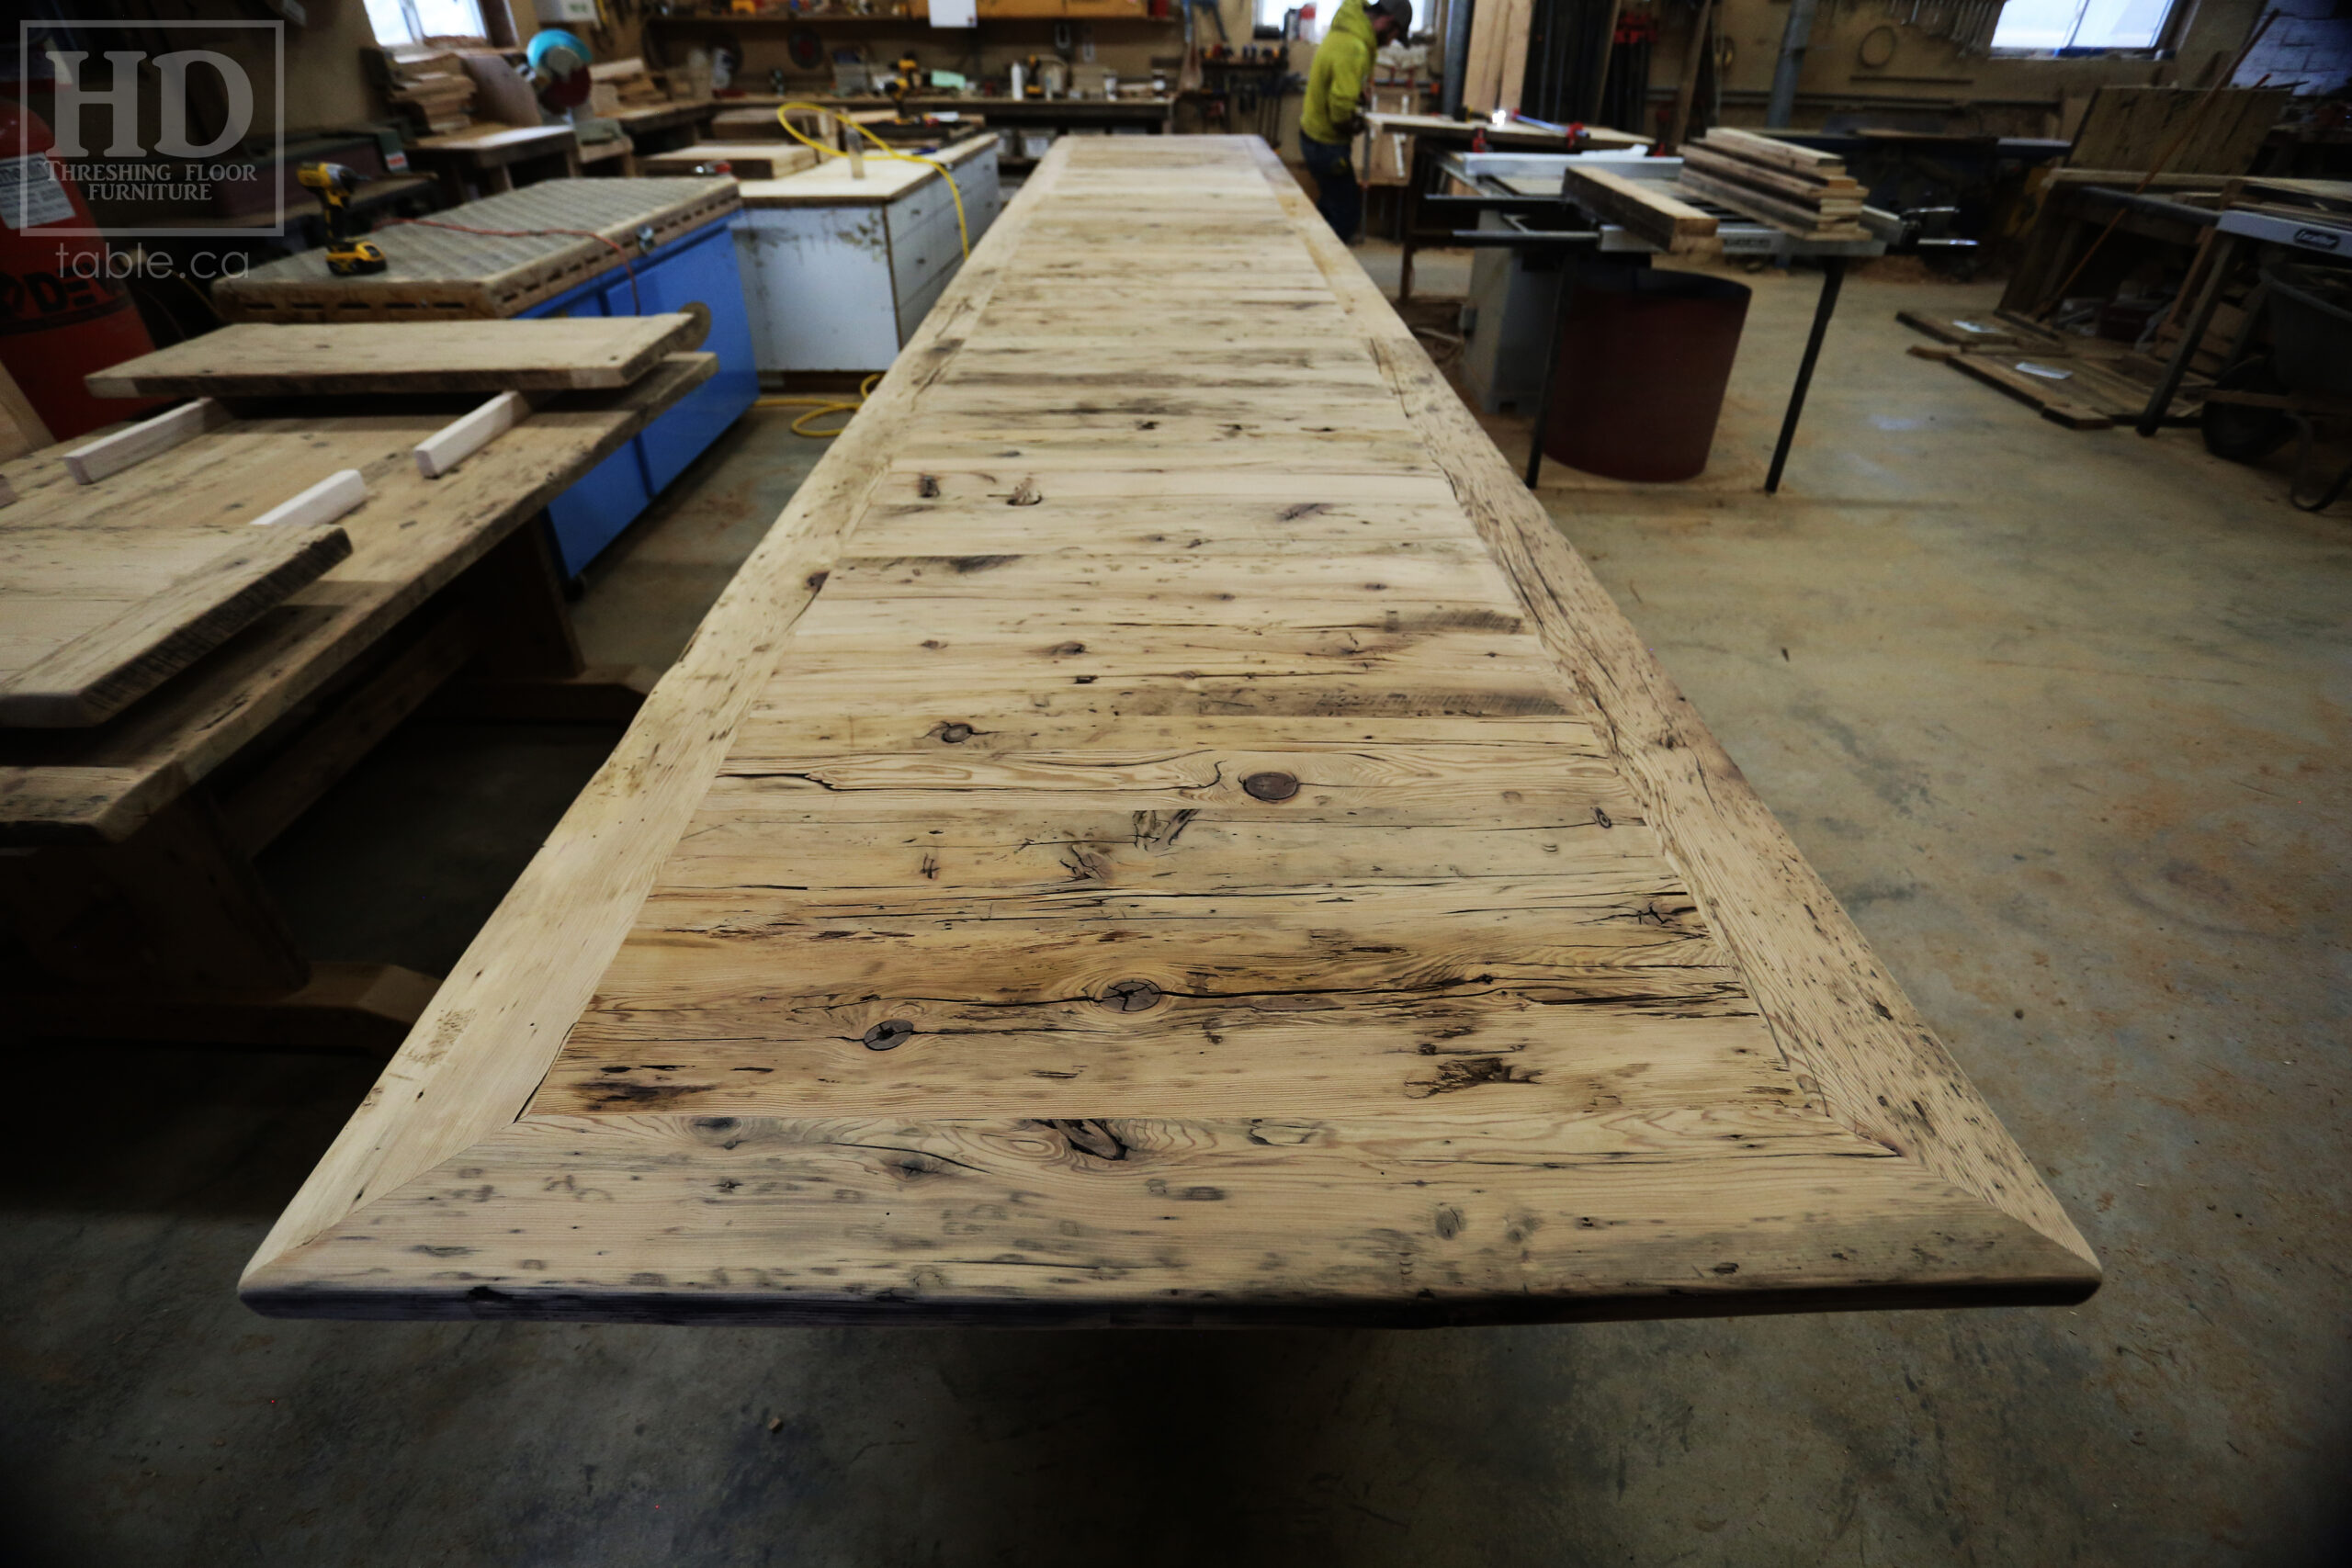 24 Ft Ontario Barnwood Table we made for a Guelph, Ontario company - 48" wide â€“ [3] 8' Sections [on site final doweling] - 3" Joist Plank Posts Base - Reclaimed Hemlock Threshing Floor 2â€ Top - Original edges & distressing maintained - Premium epoxy + satin polyurethane finish - www.table.ca